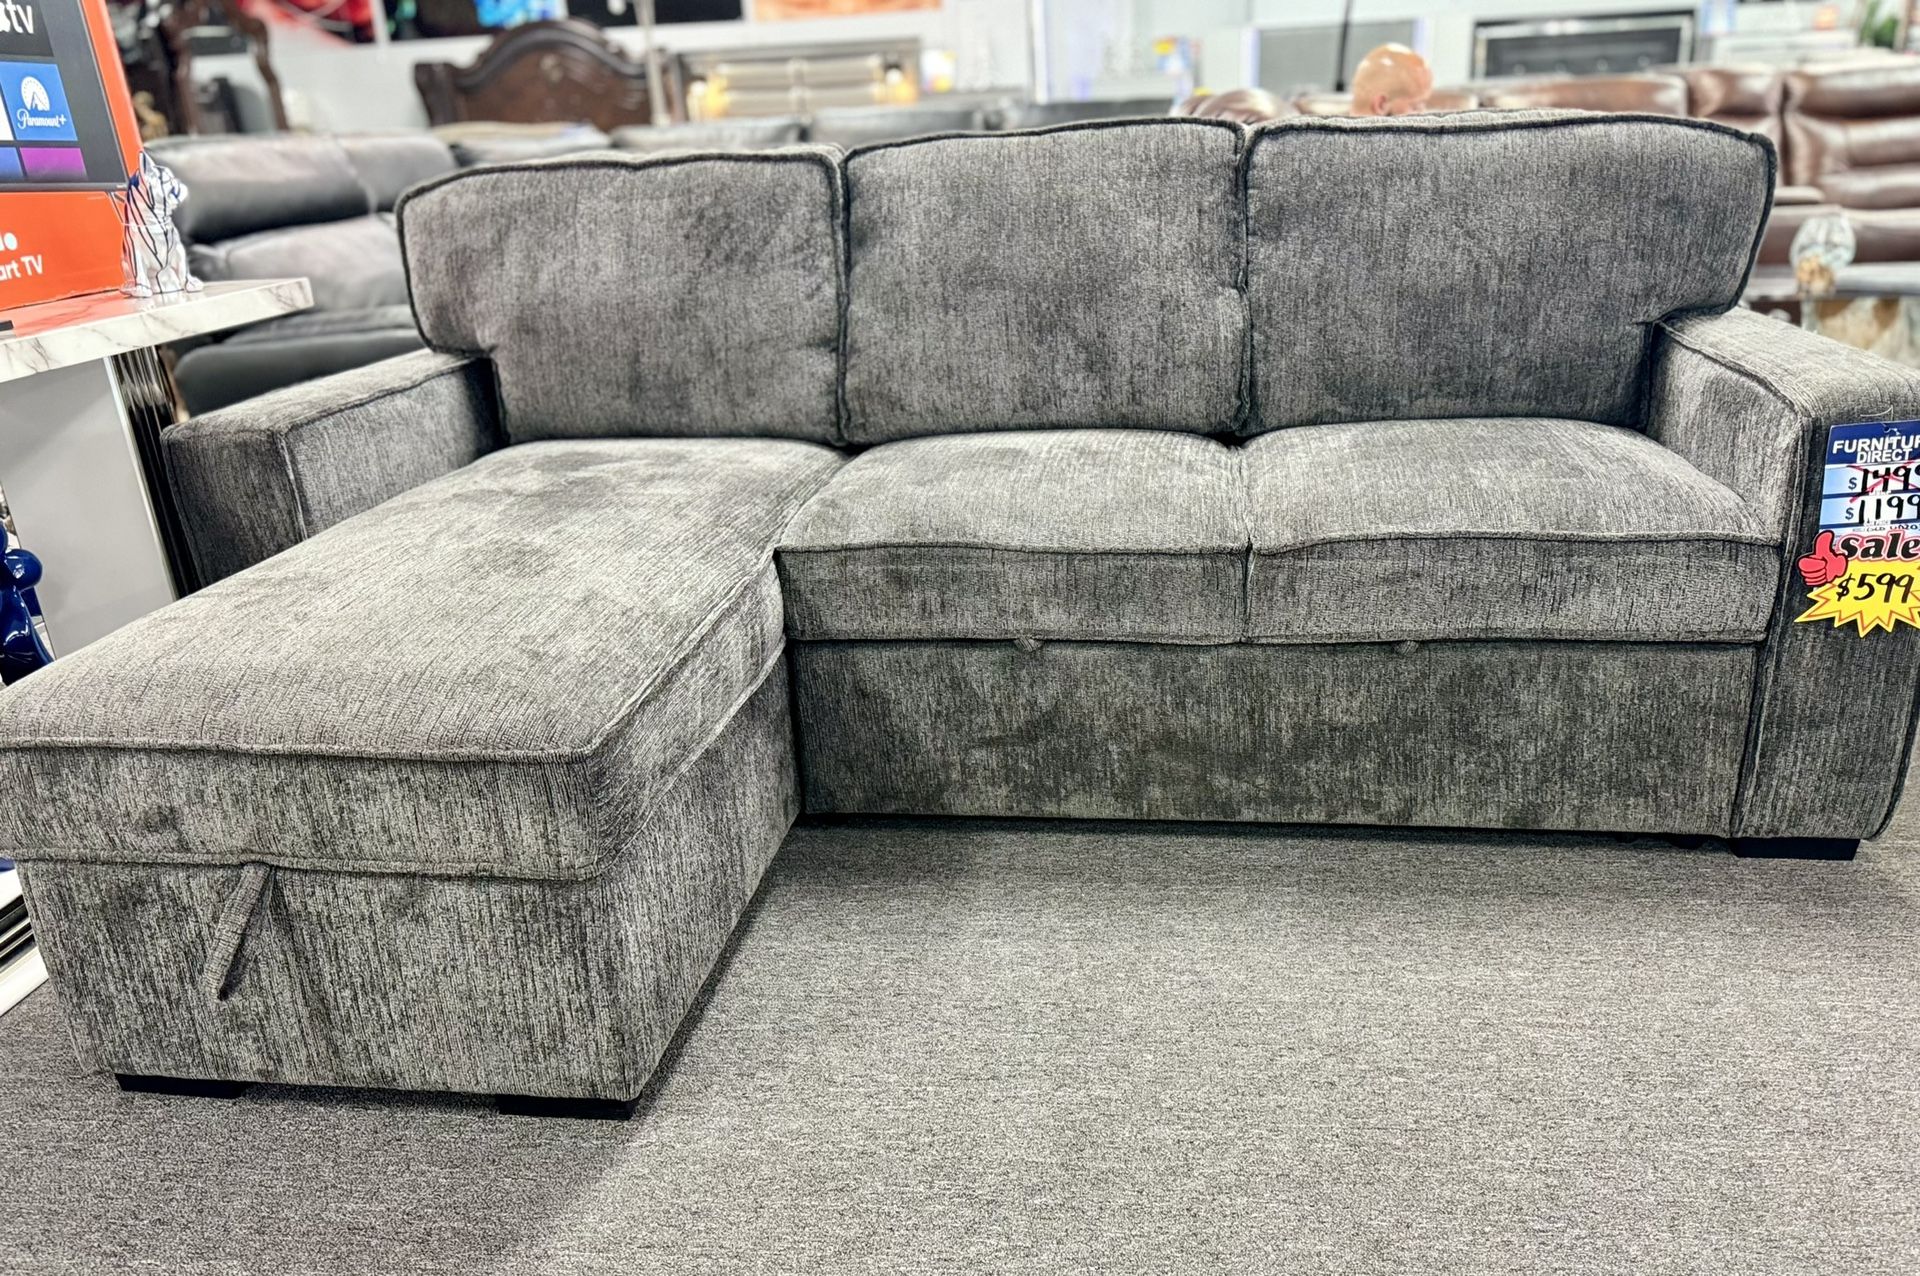 Gorgeous Grey Pull Out Sleeper Sectional Available Limited Time Only $599🚨